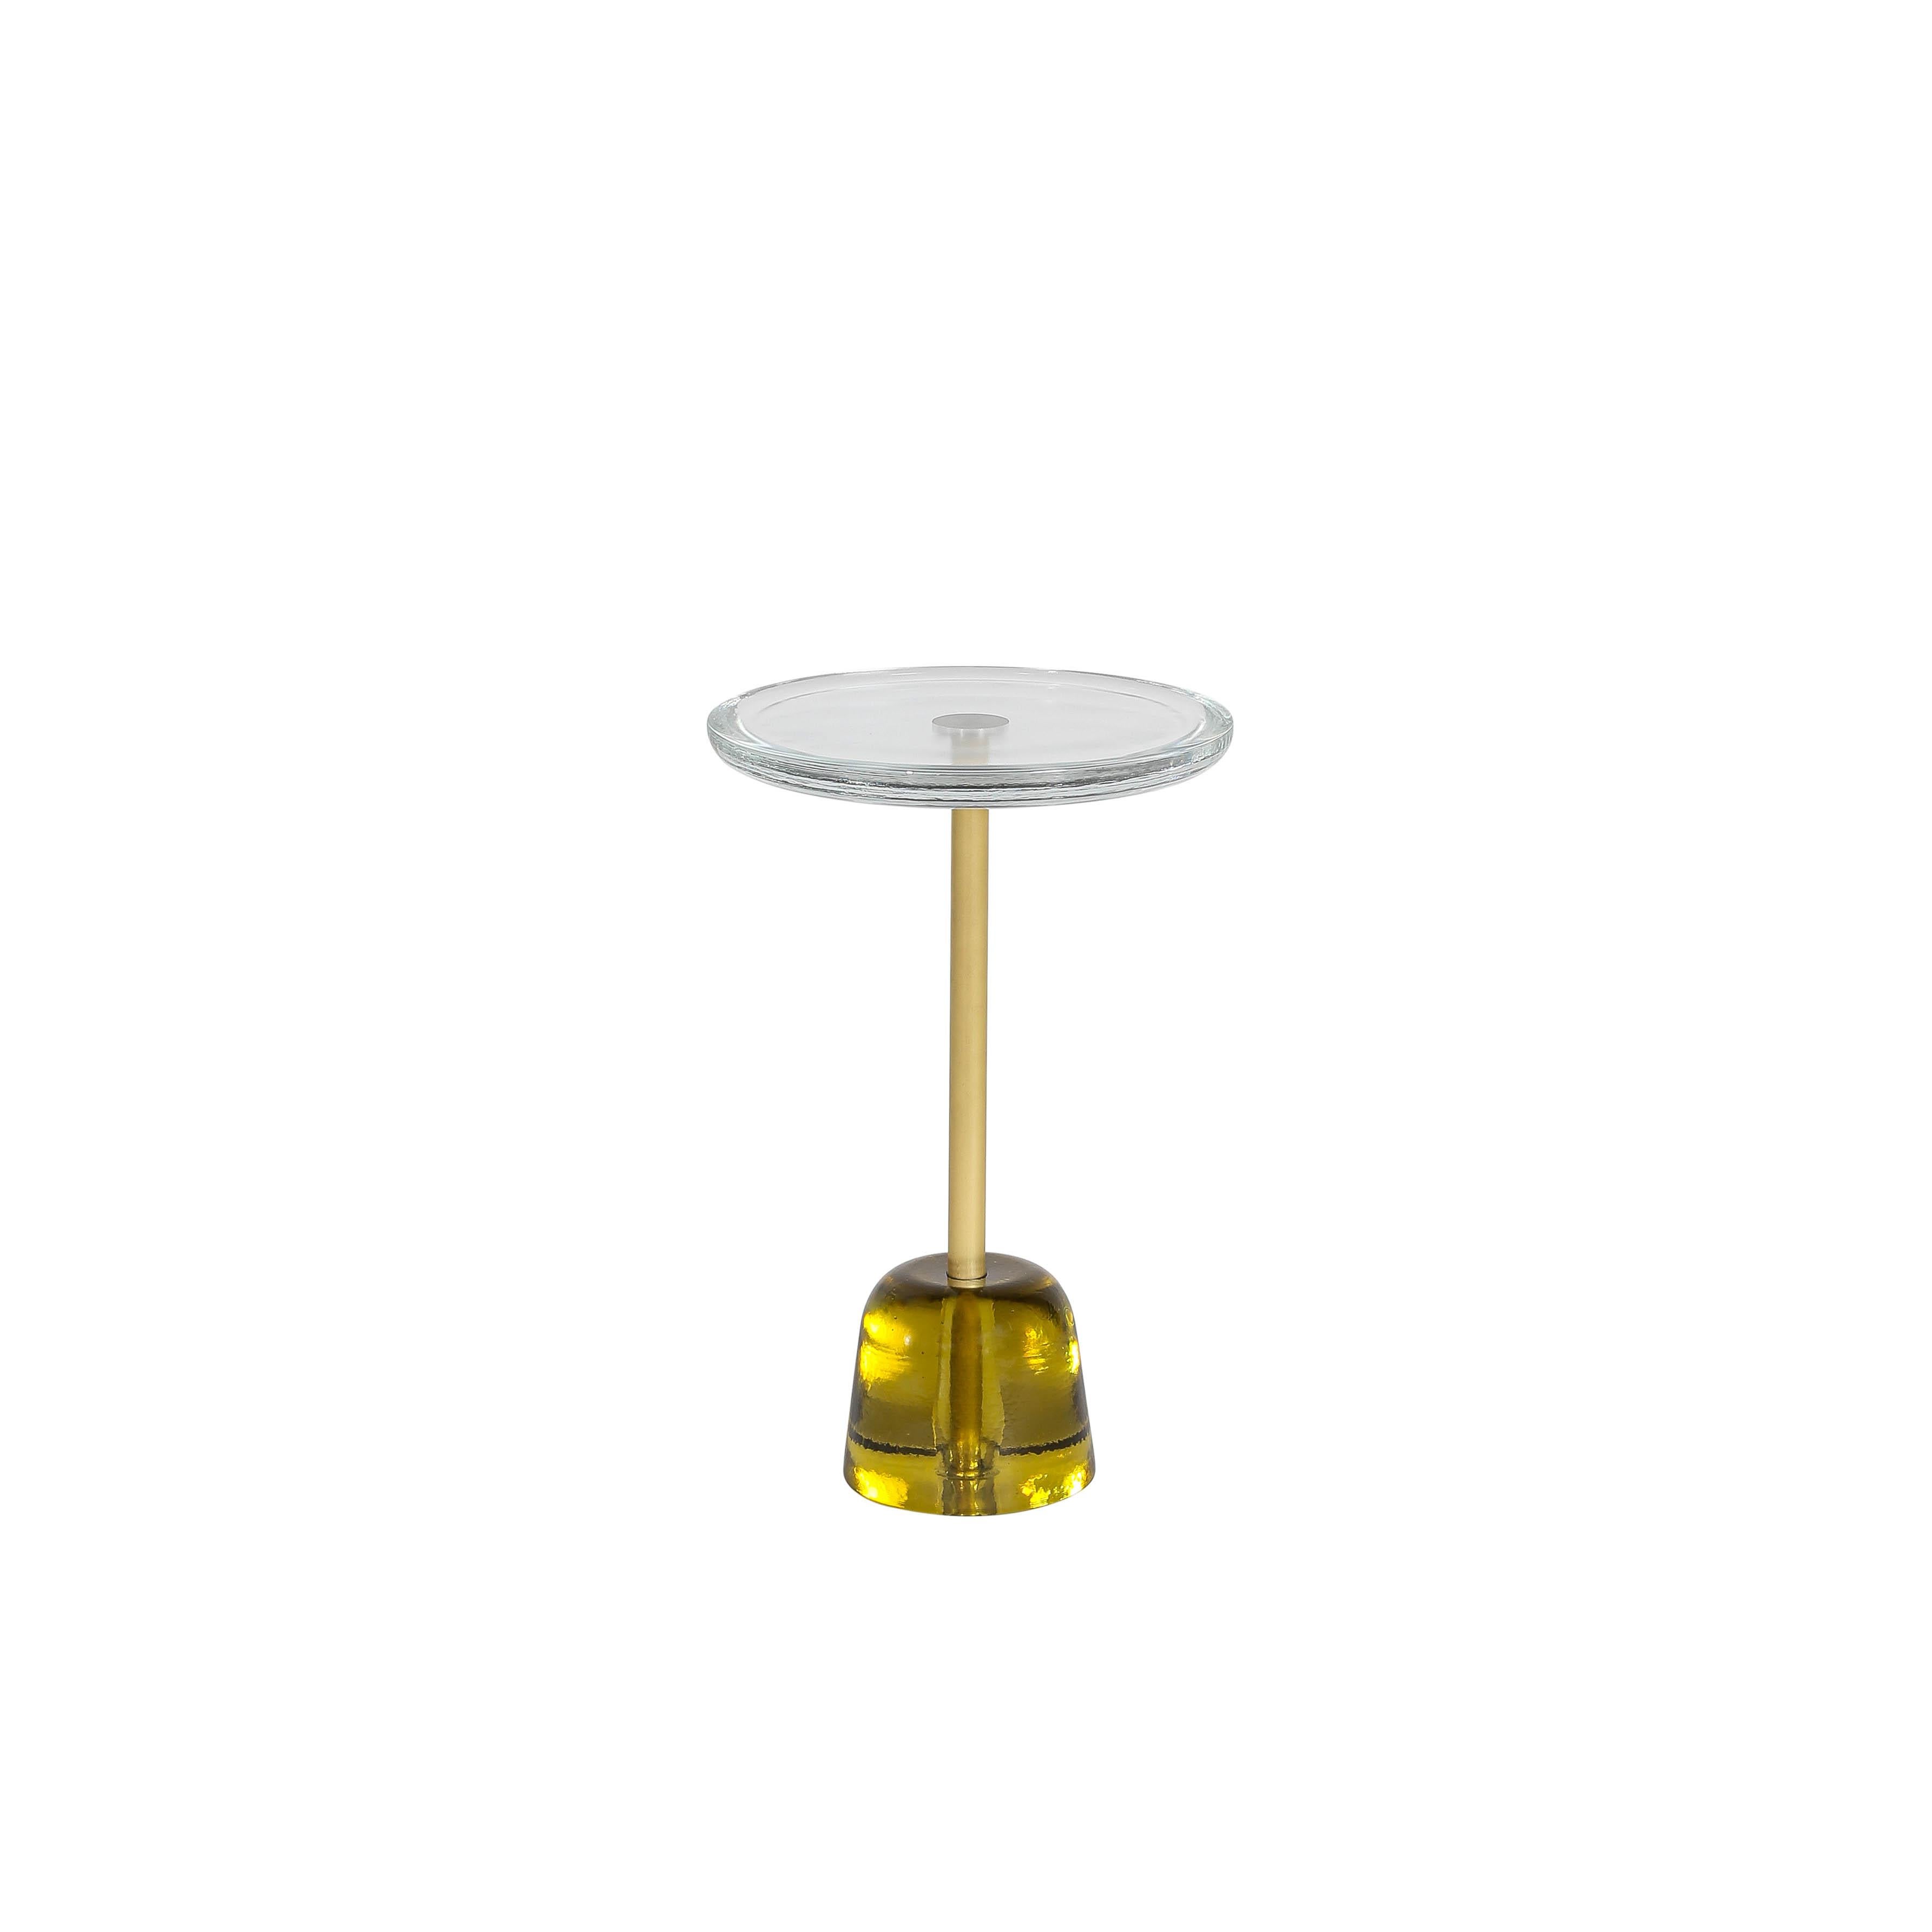 Pina High Transparent Brass Side Table by Pulpo
Dimensions: D34 x H52 cm
Materials: glass; brass and steel

Also available in different colours. Please contact us.

Sebastian Herkner’s distinctively tall, skinny side table series pina is inspired by